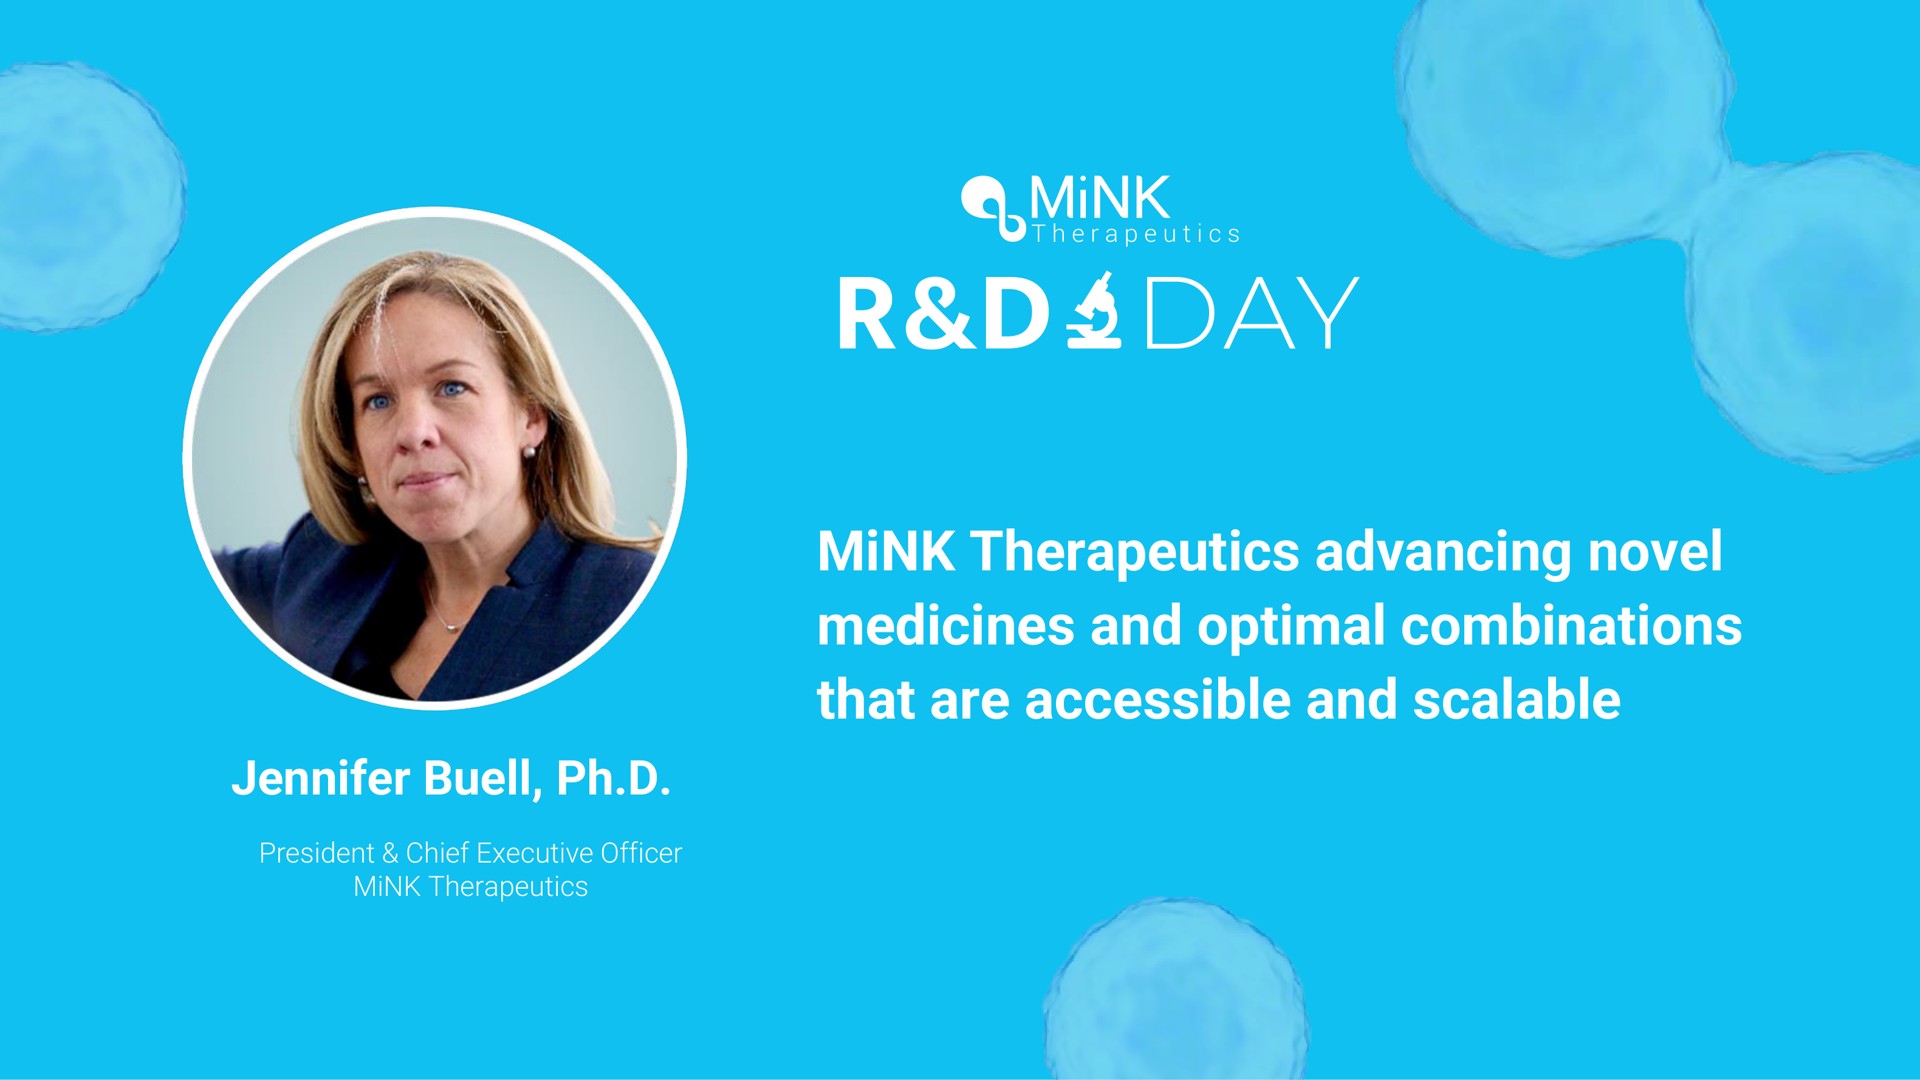 mink therapeutics advancing novel medicines and optimal combinations that are accessible and scalable day | Mink Therapeutics